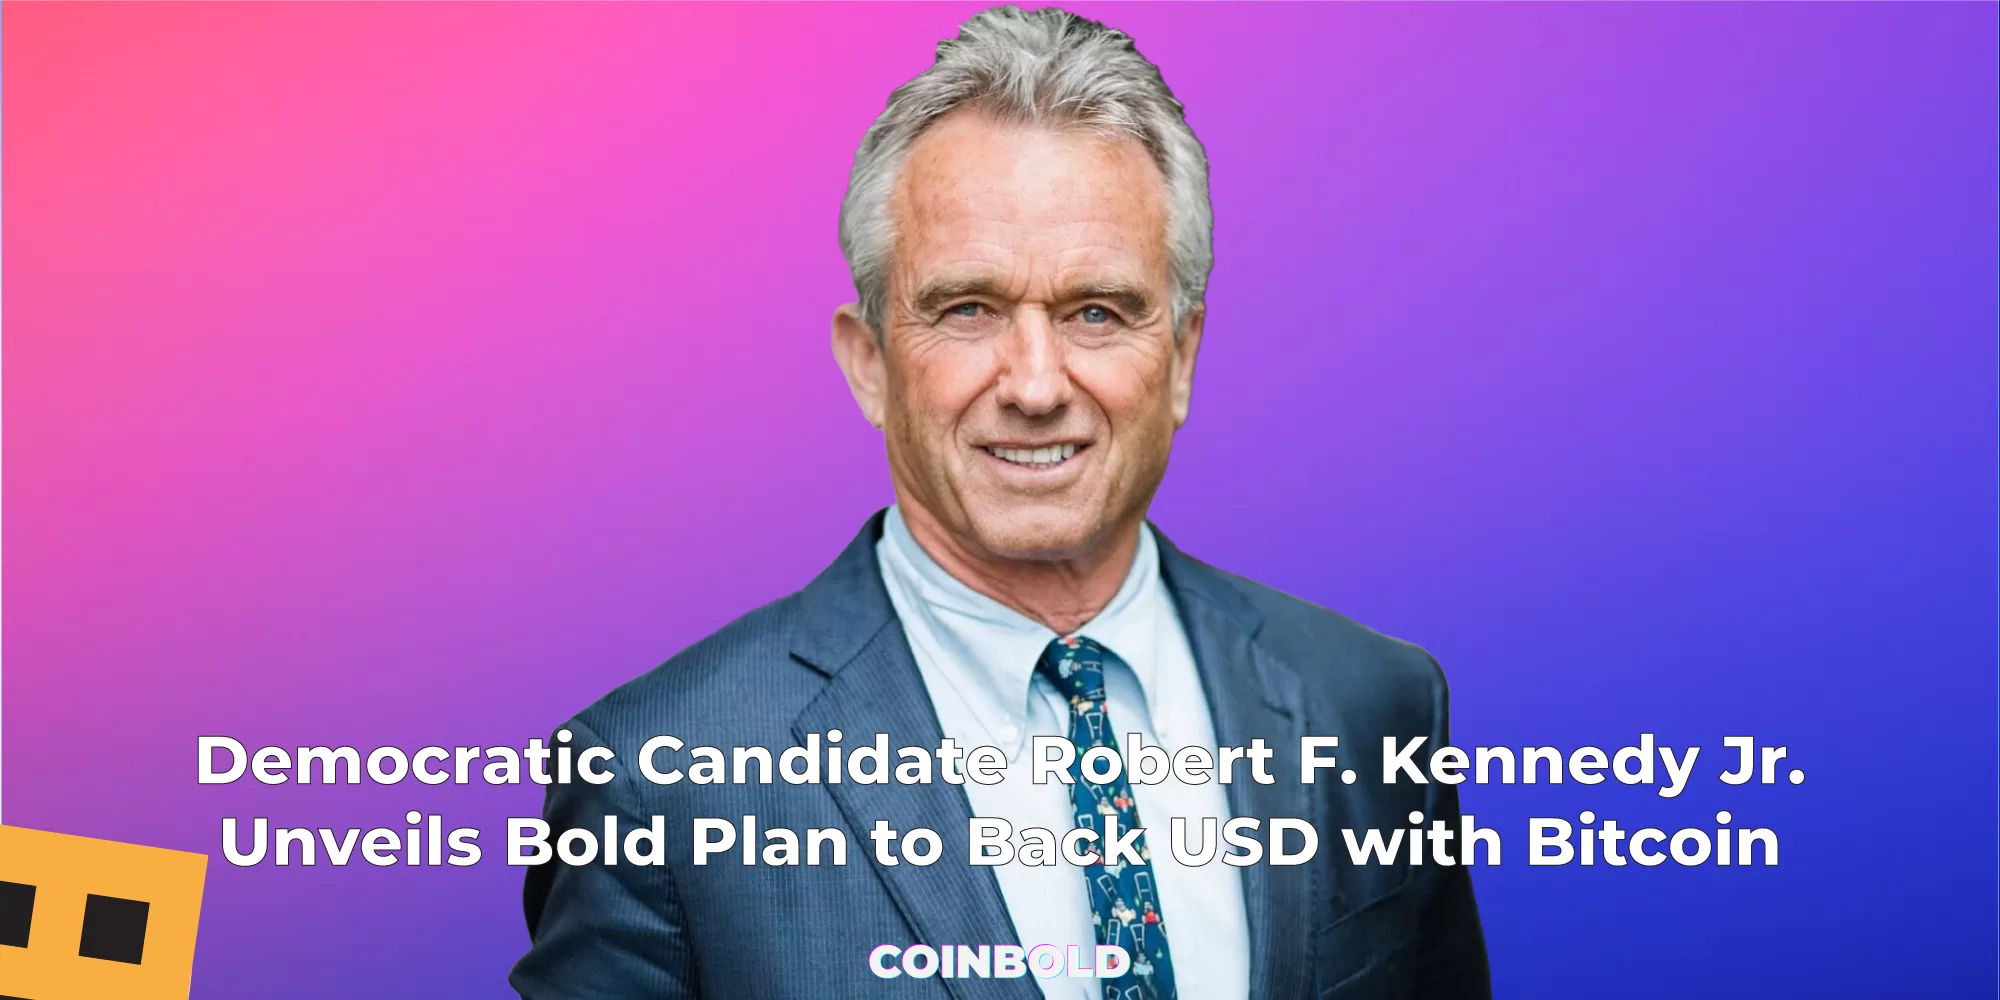 Democratic Candidate Robert F. Kennedy Jr. Unveils Bold Plan to Back USD with Bitcoin